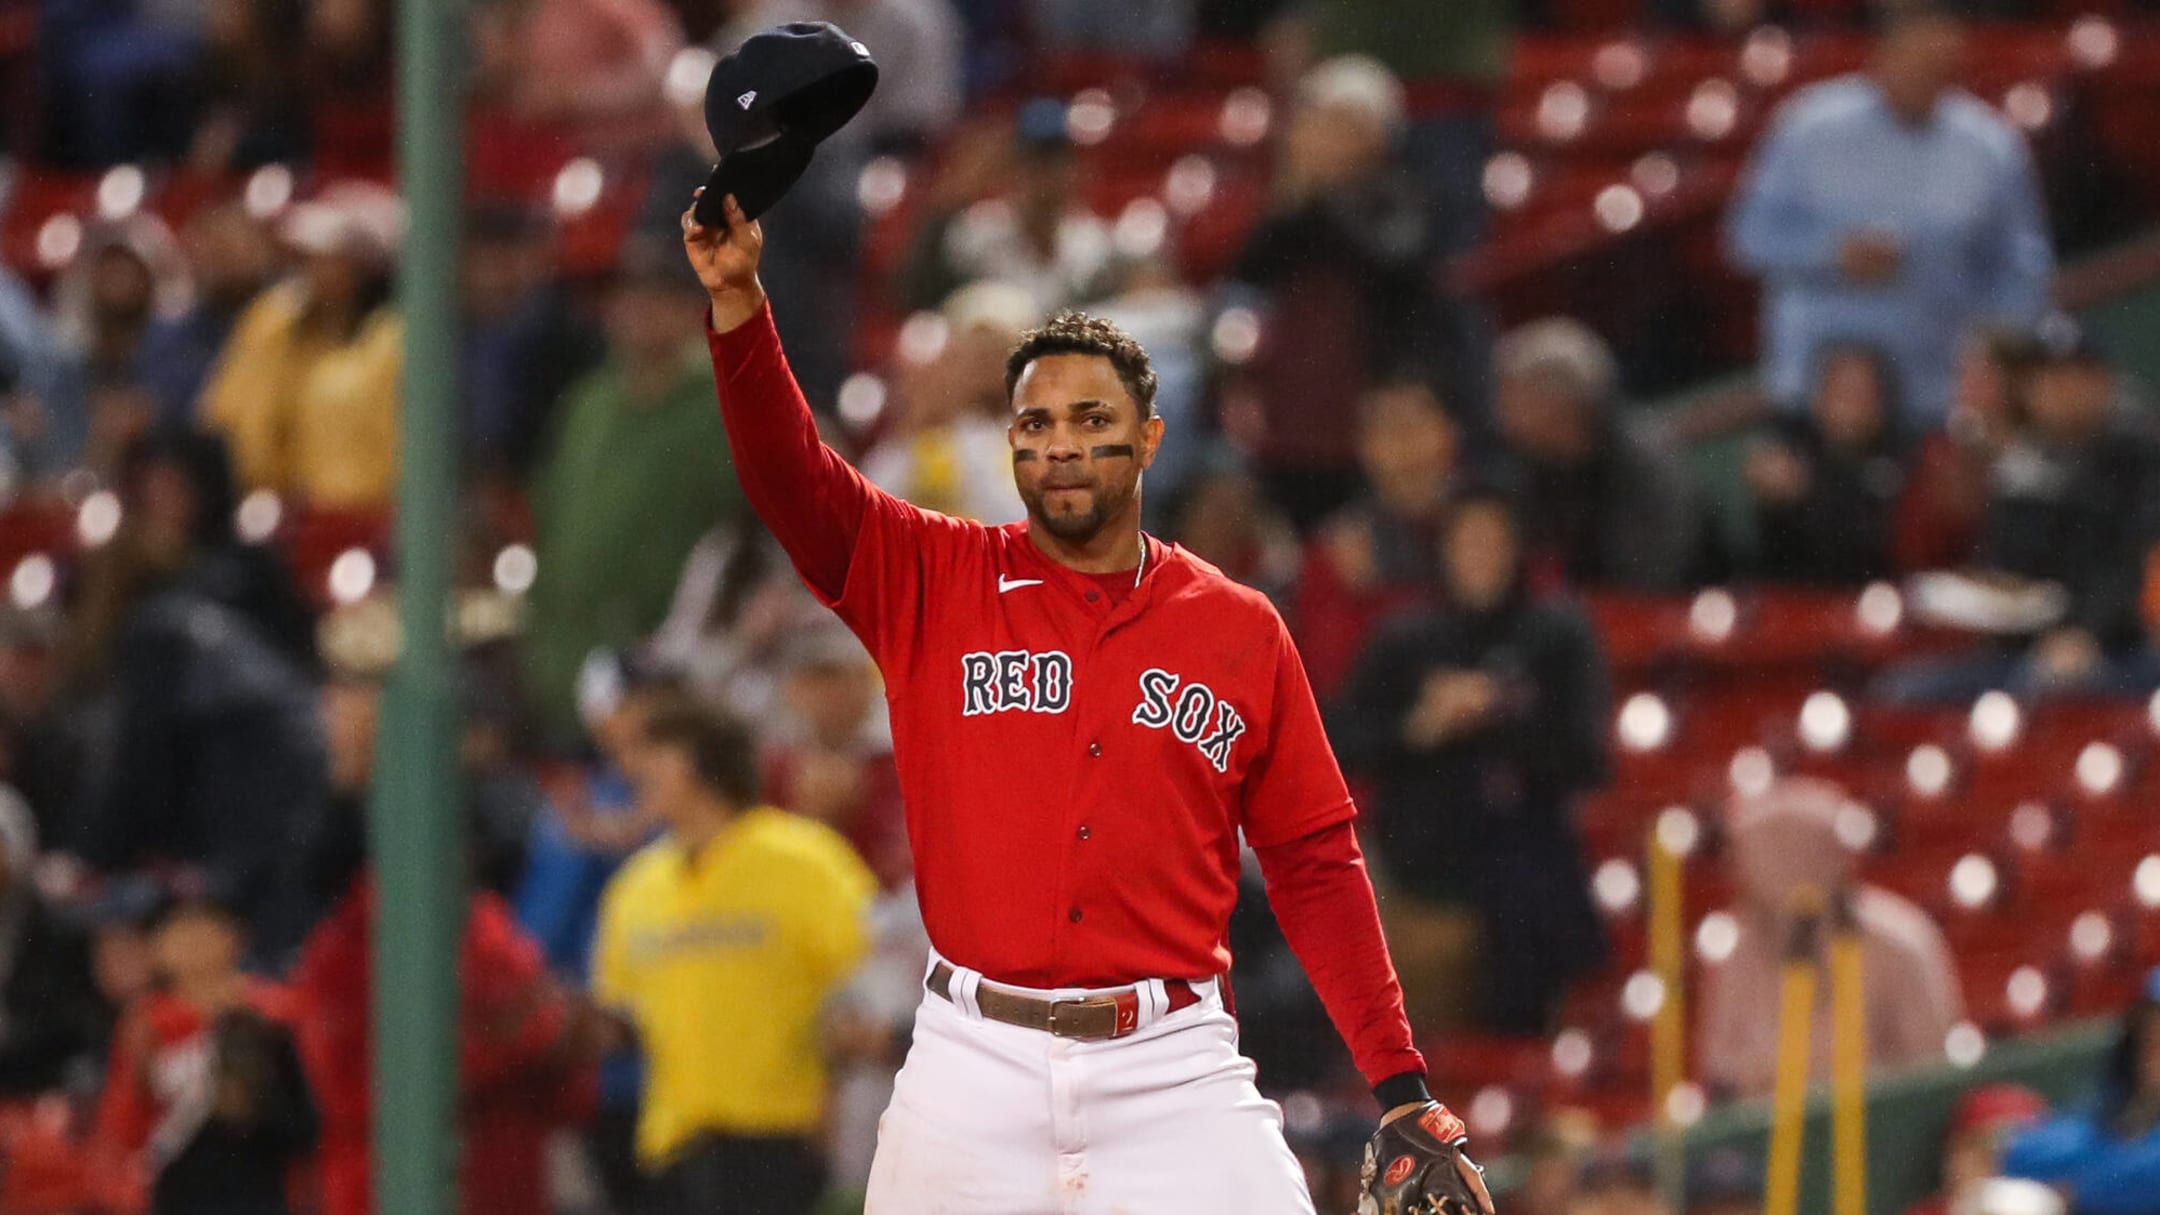 Xander Bogaerts on his extension: 'I want to stay here. What's not